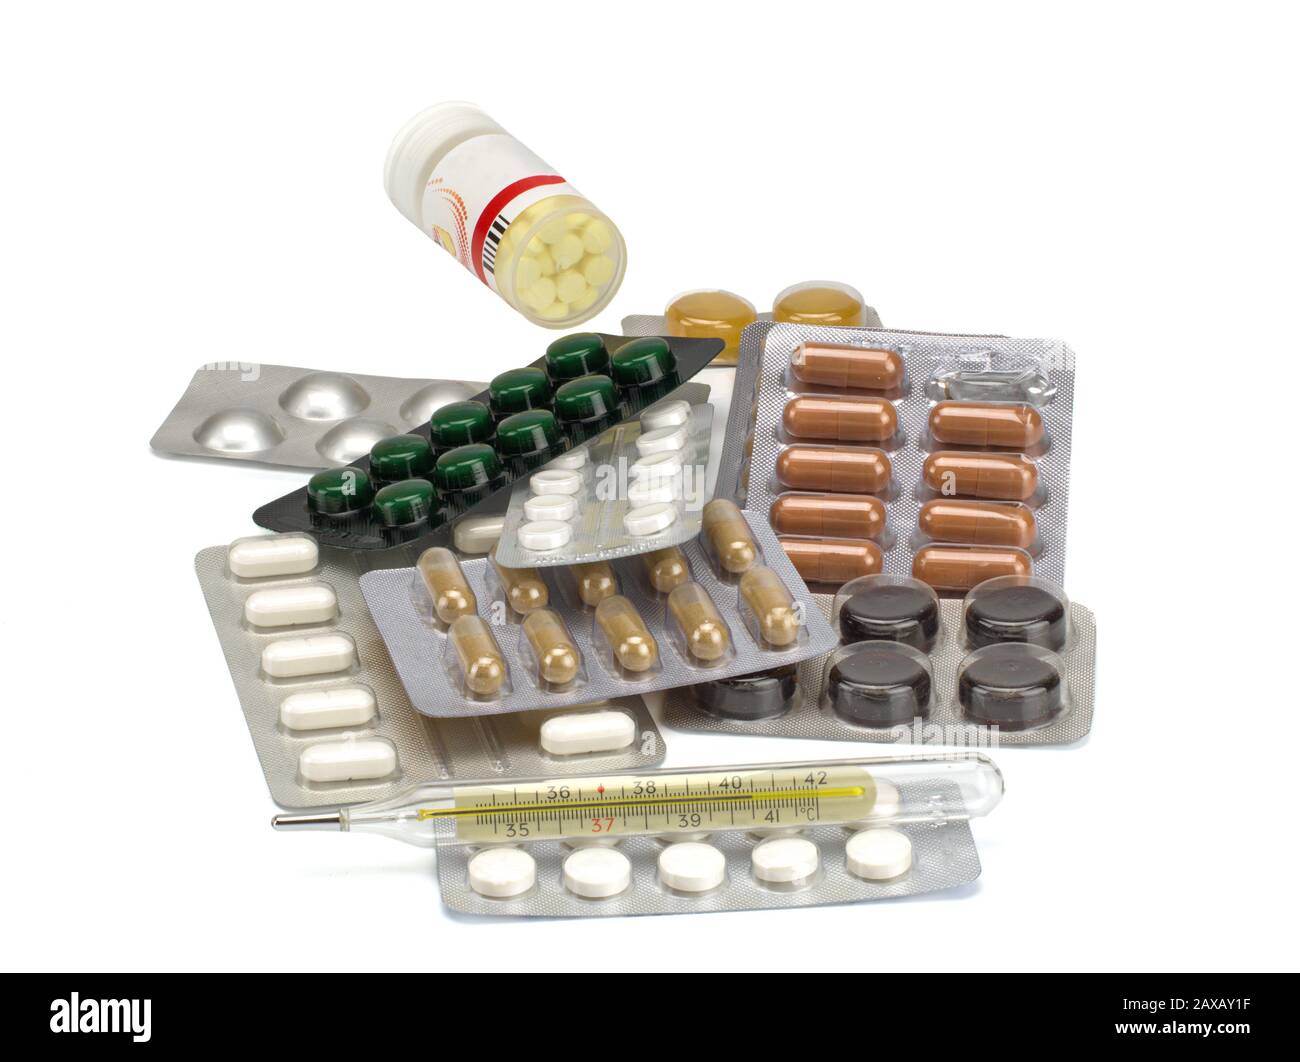 Different tablets, pills in foil blister packs, medications drugs and thermometer on white background Stock Photo